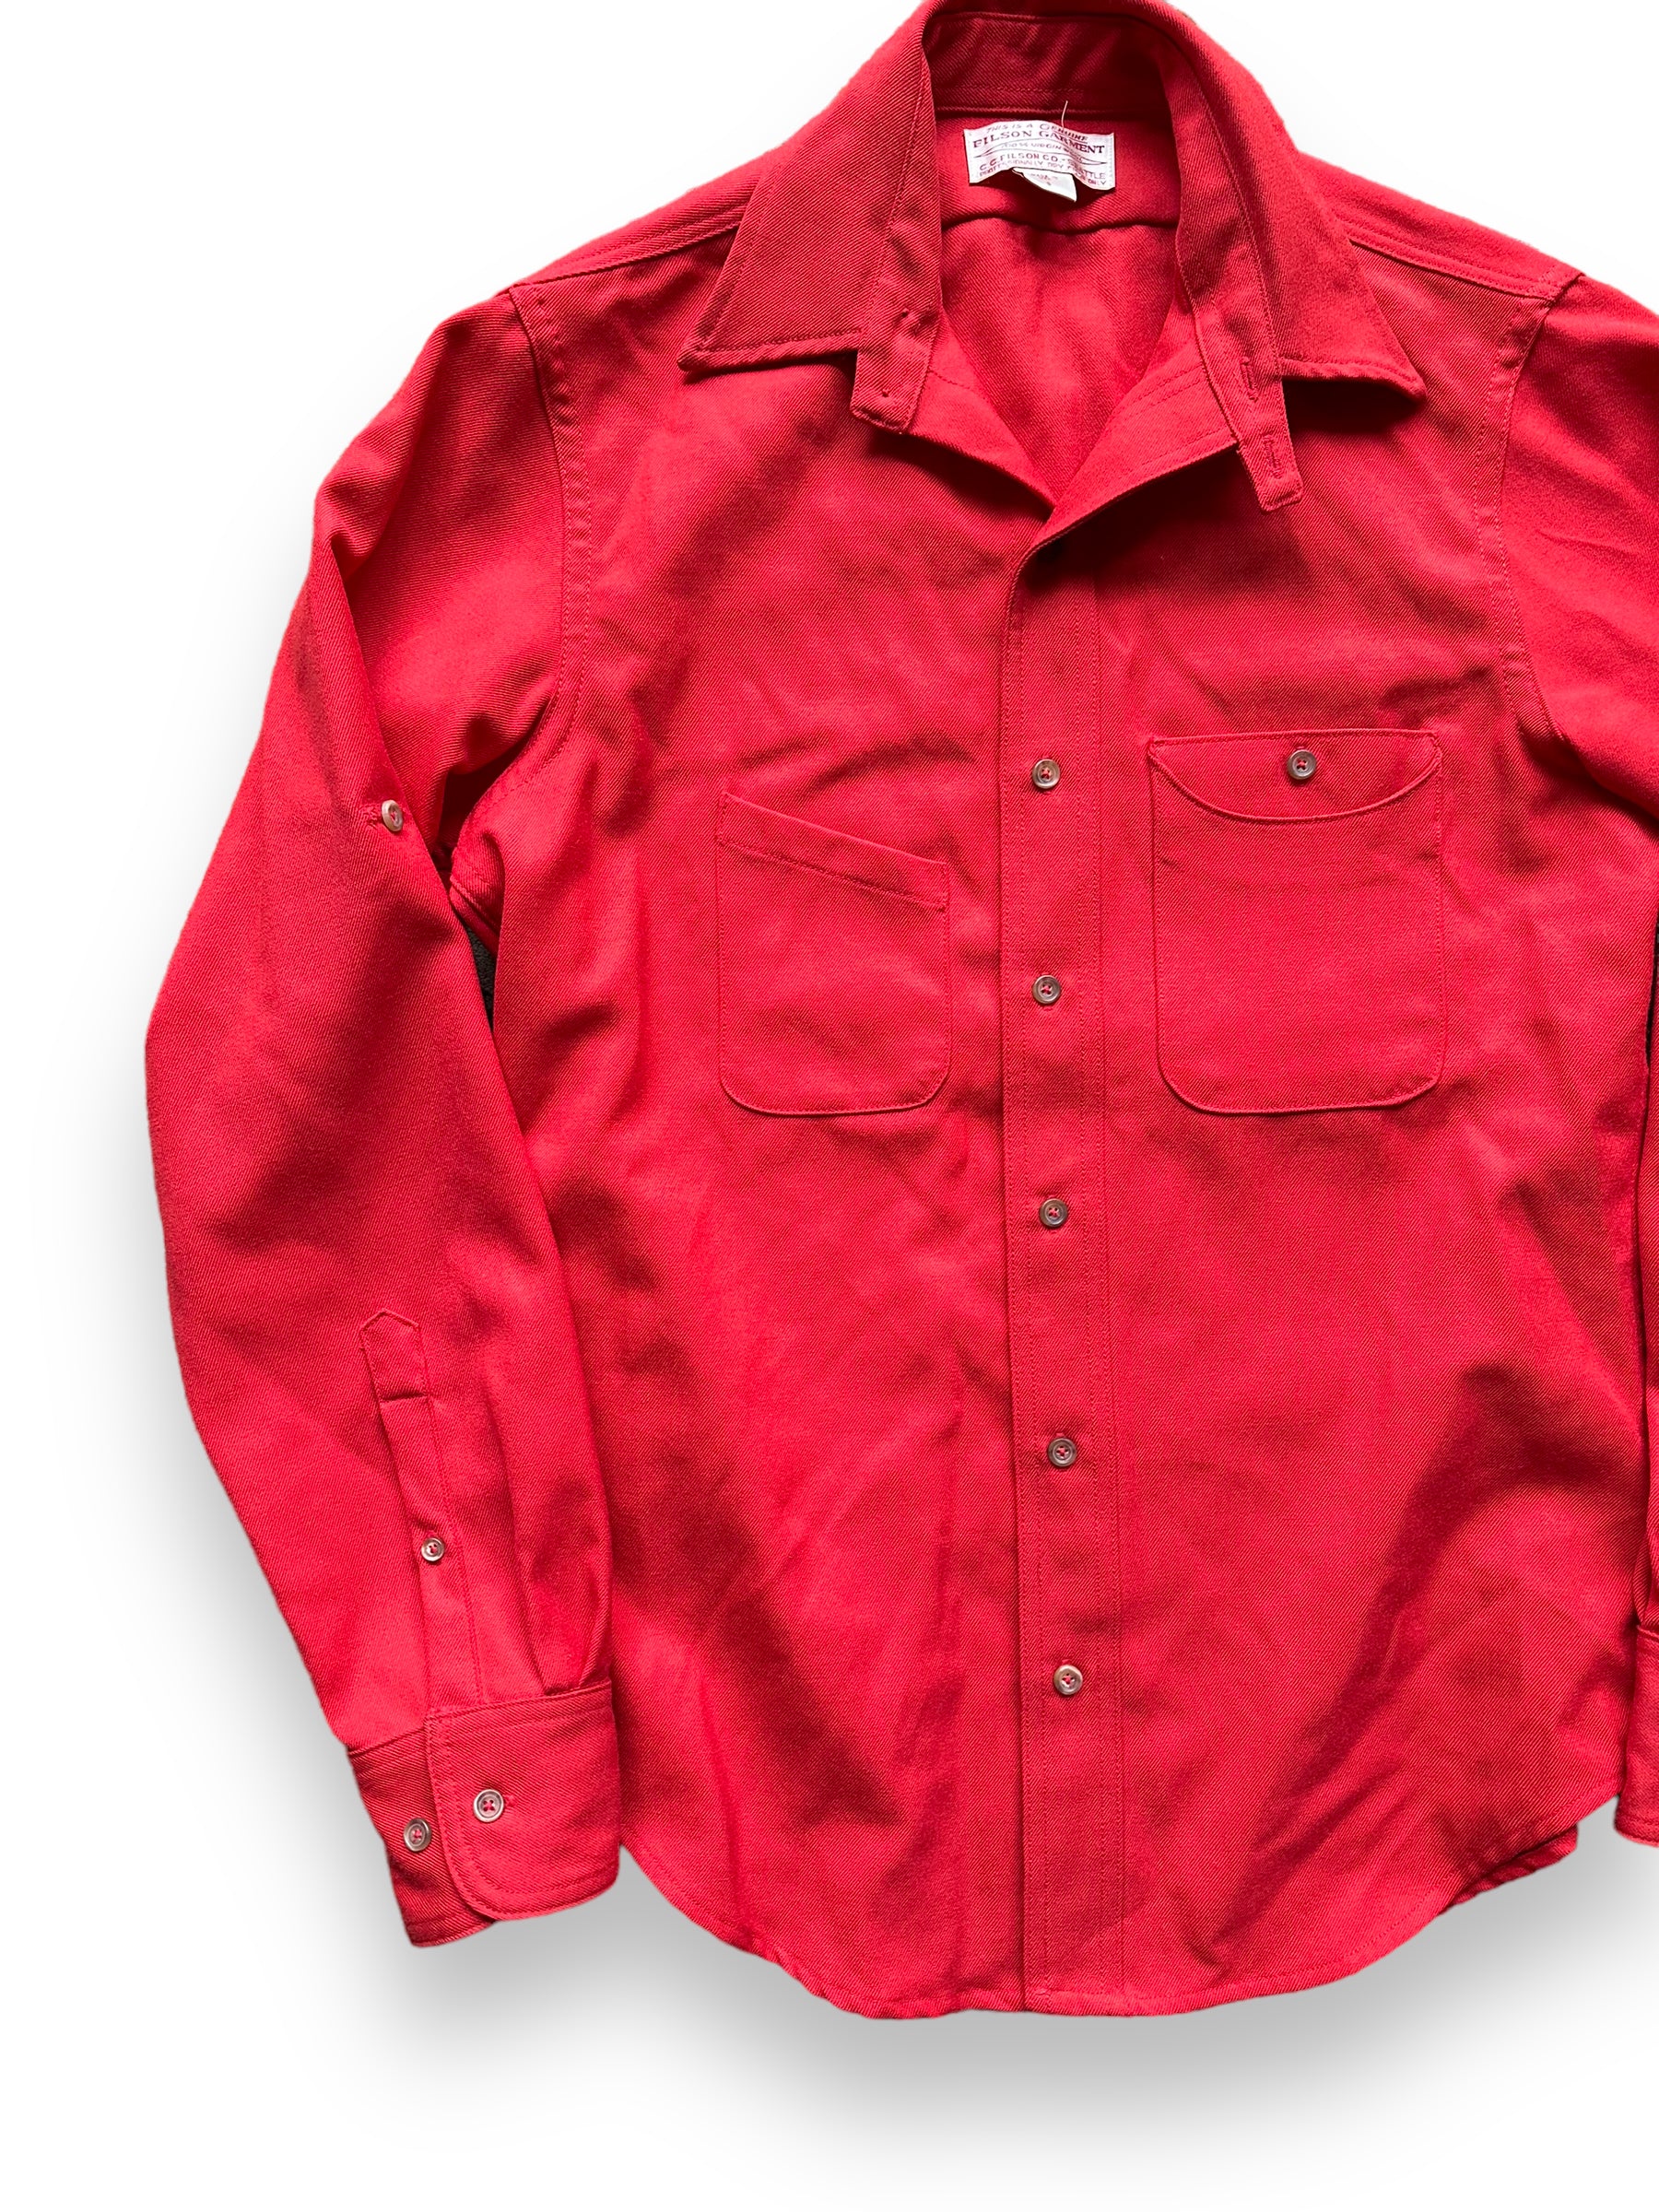 Front right of Filson Merino Wool Red Scout Shirt |  Barn Owl Vintage Goods | Vintage Filson Workwear Seattle